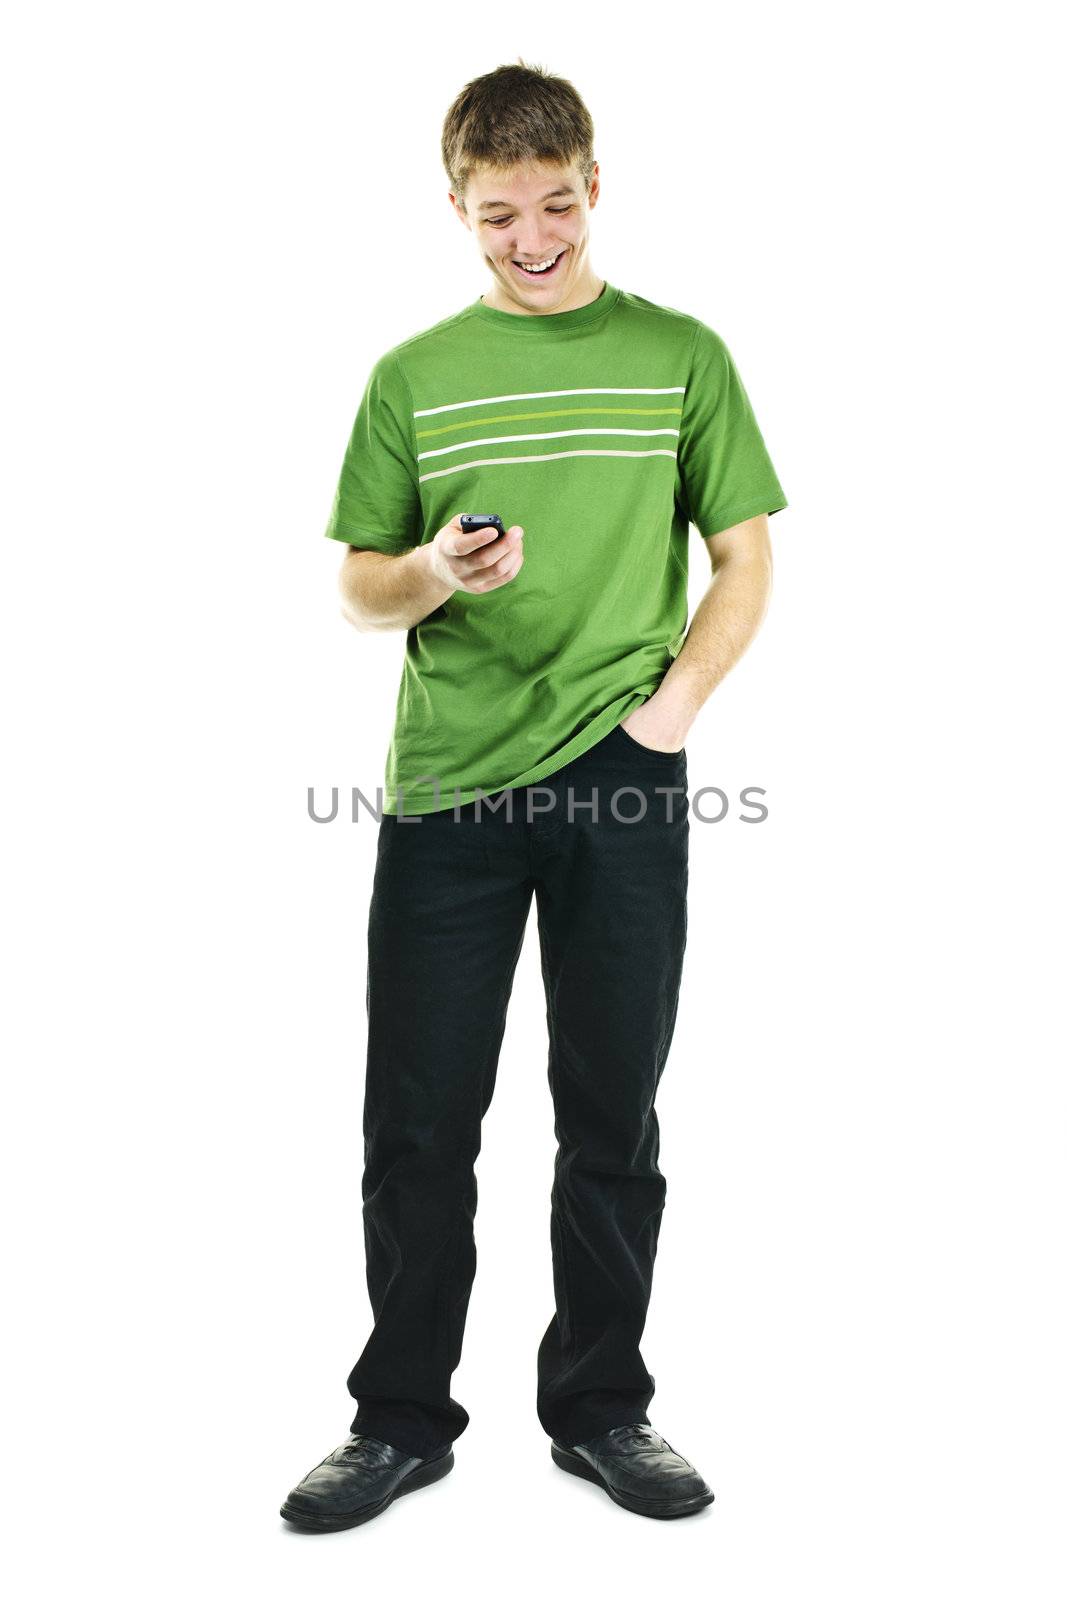 Happy young man texting on cellphone standing full body isolated on white background